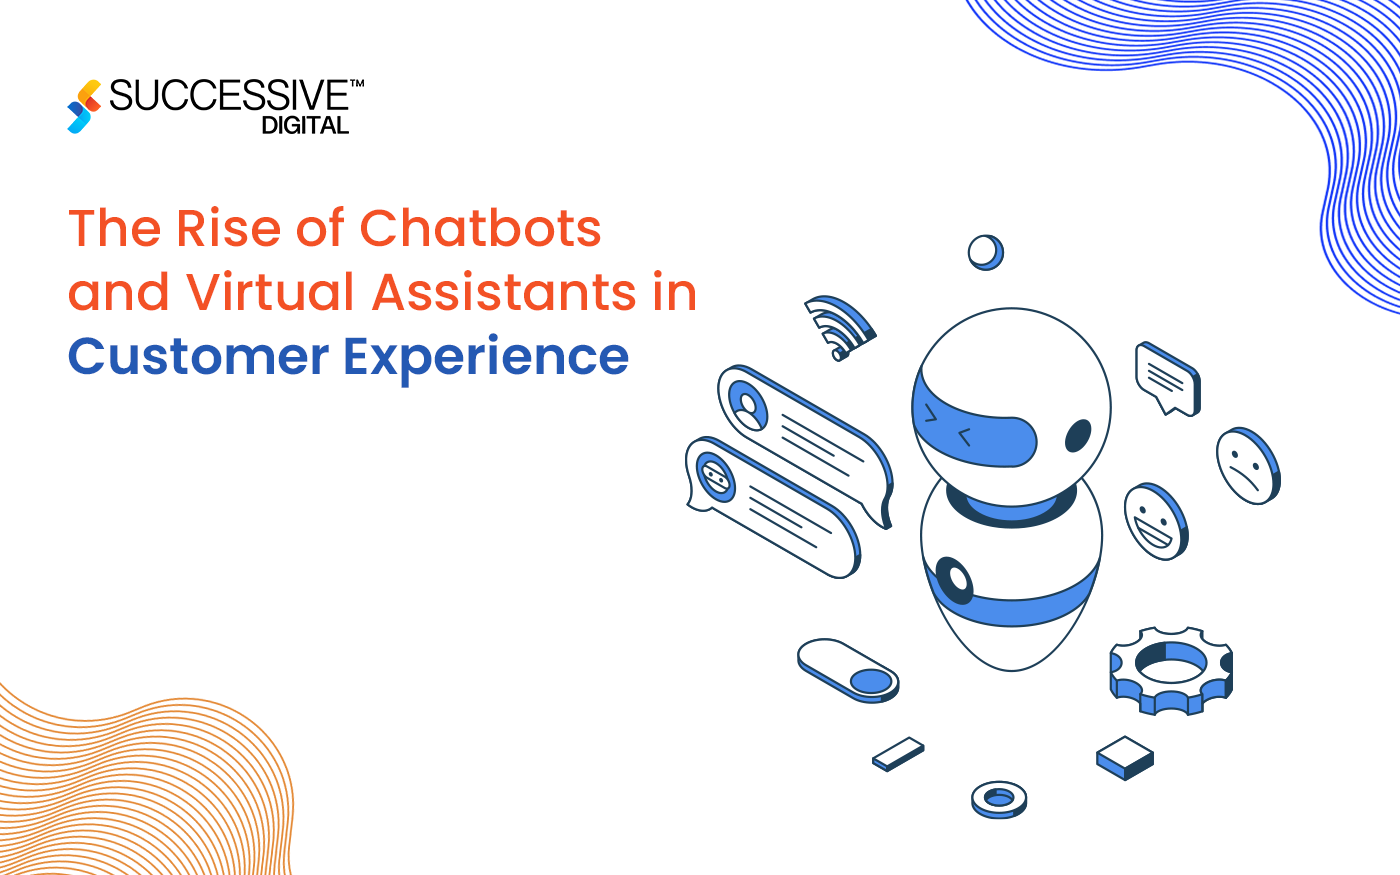 The rise of Chatbots and Virtual Assistants in Customer Experience